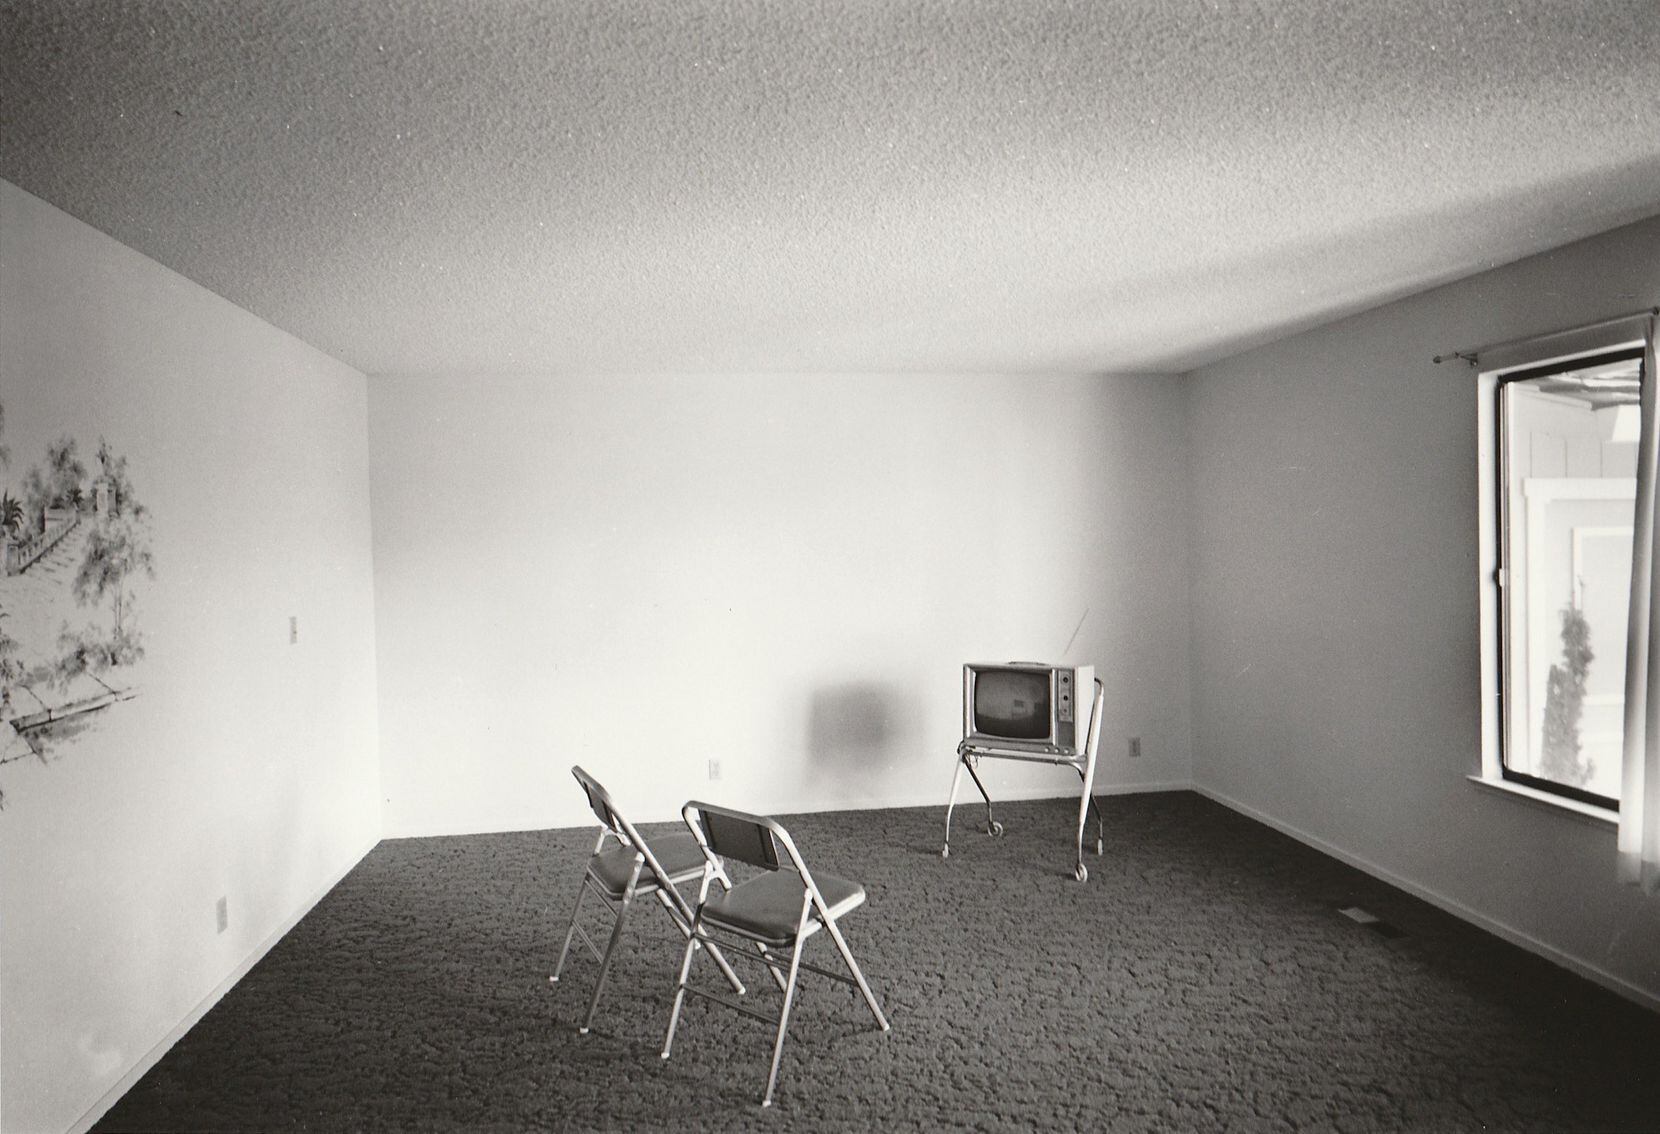 Bill Owens' "Empty room with 2 chairs" captures the transitory nature of suburban living for many residents. (Courtesy of PDNB Gallery, Dallas)